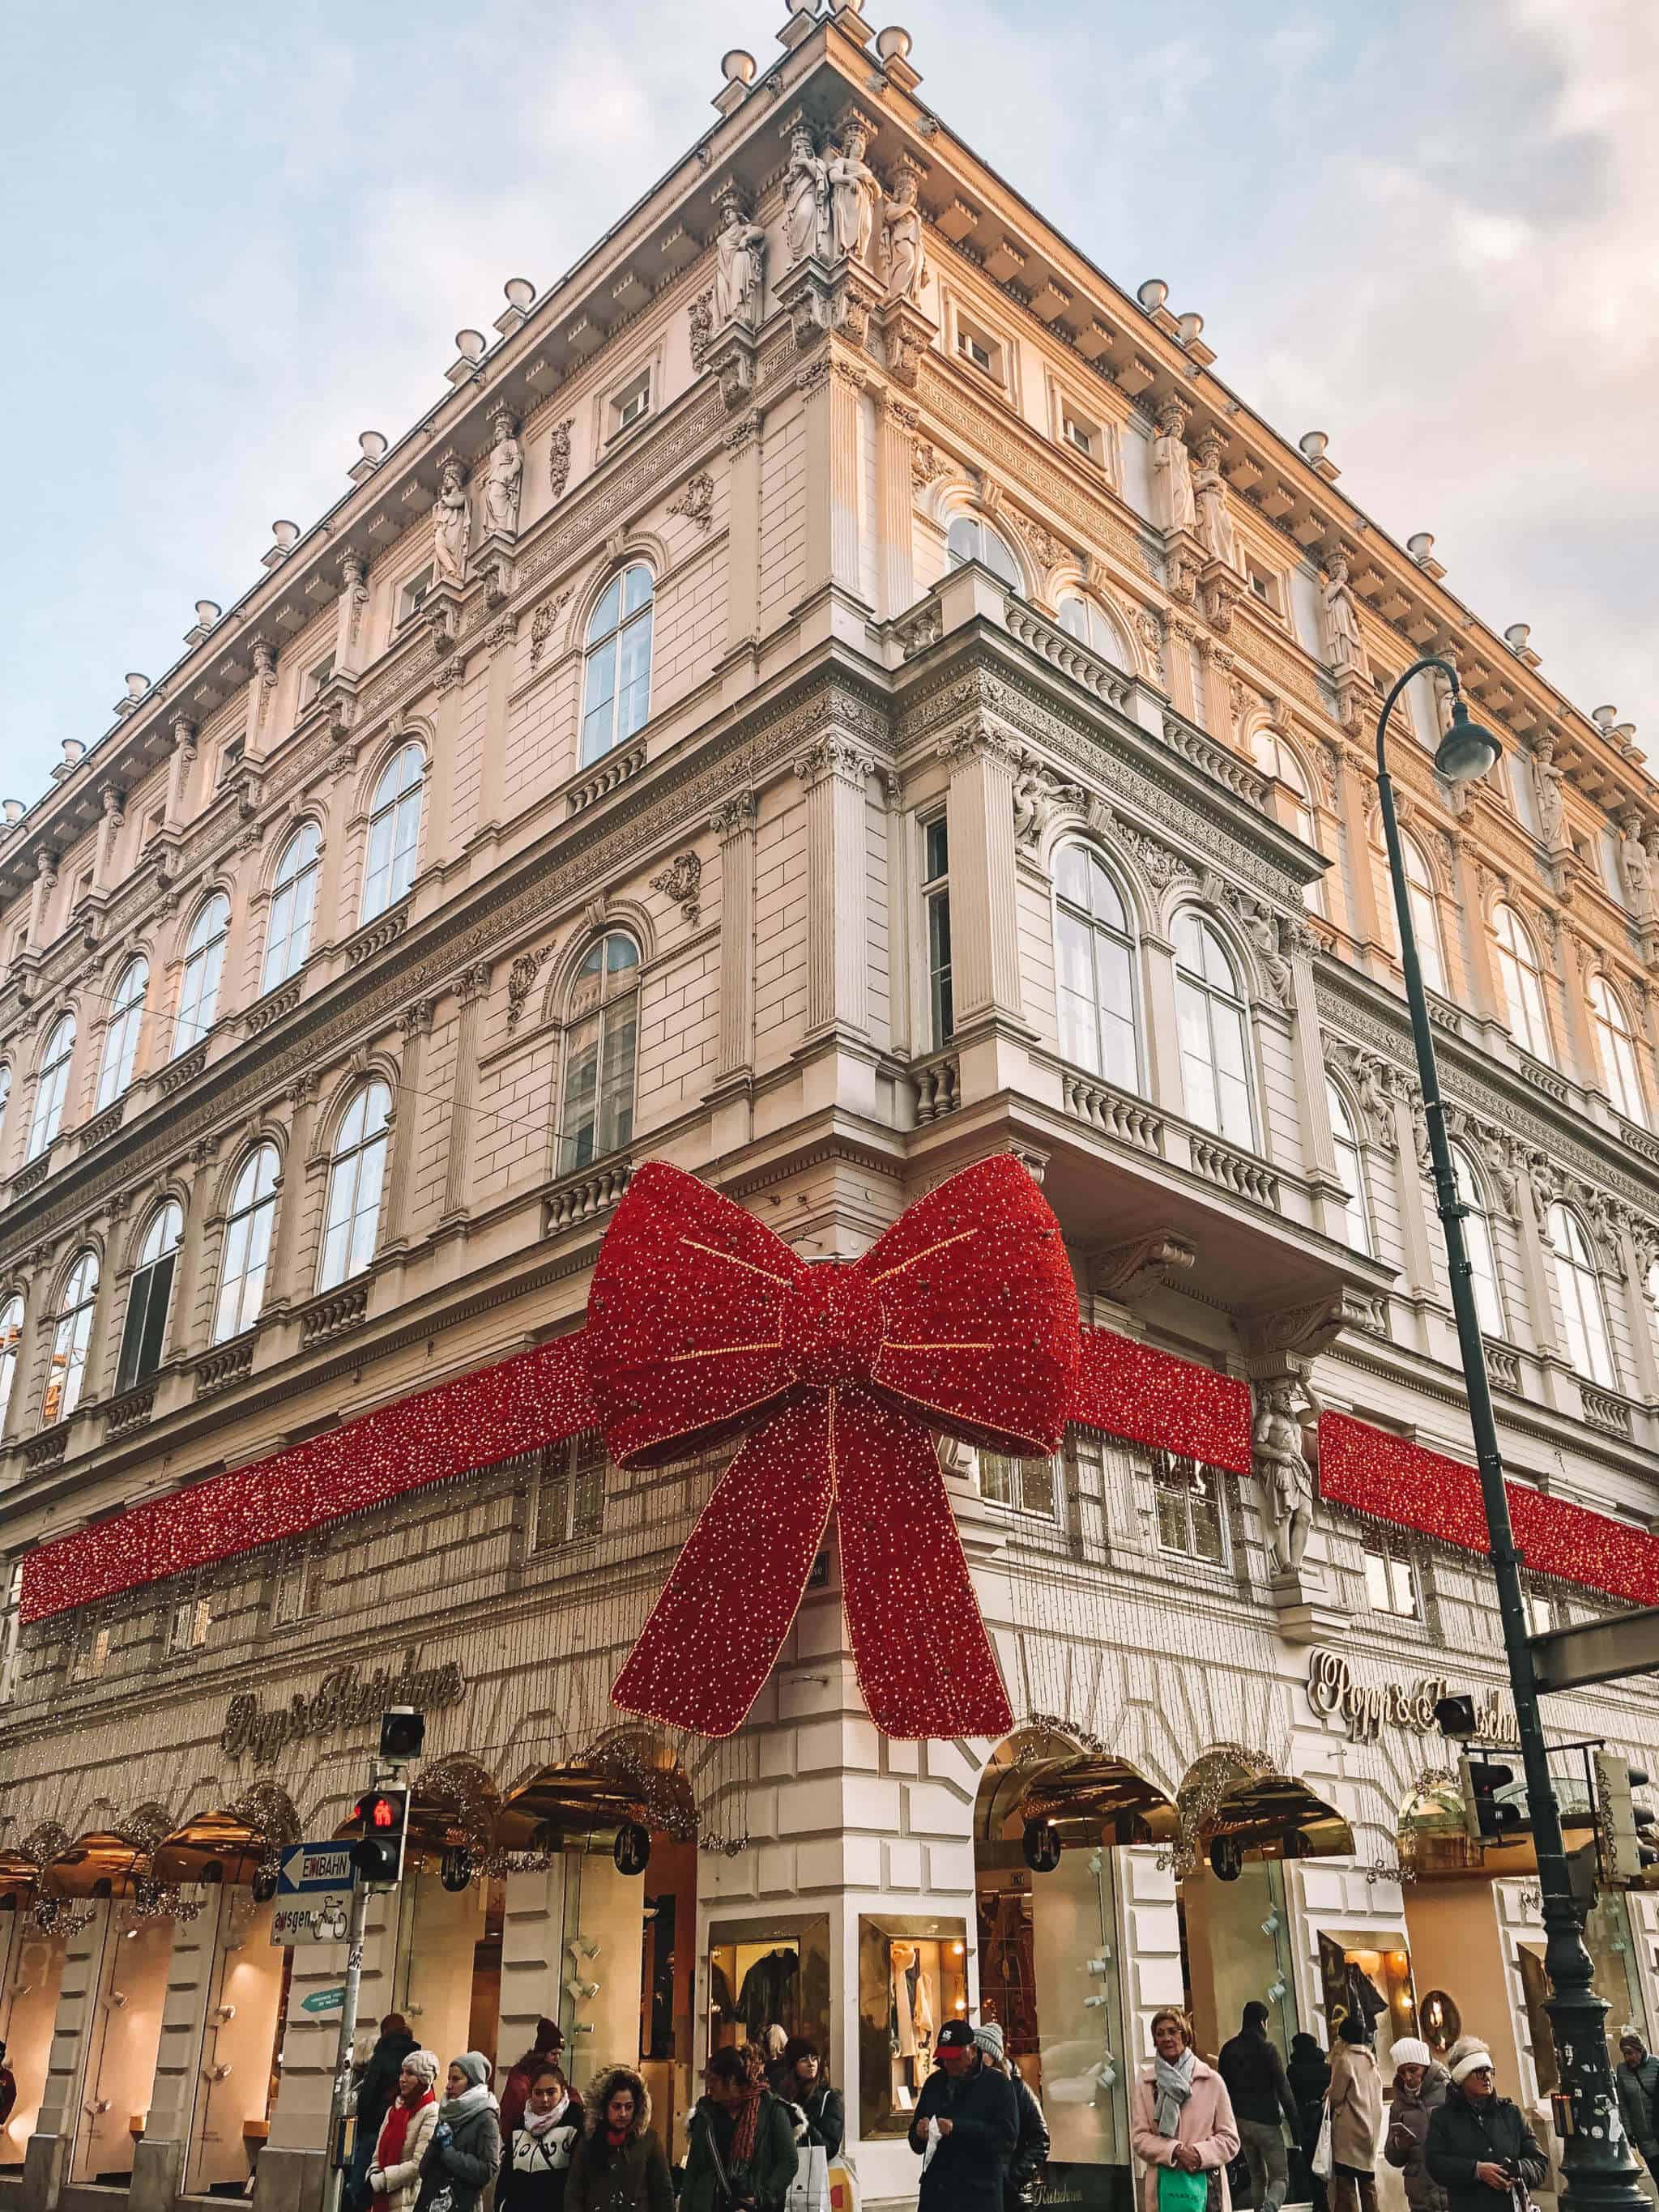 Christmas in Vienna with big red bows